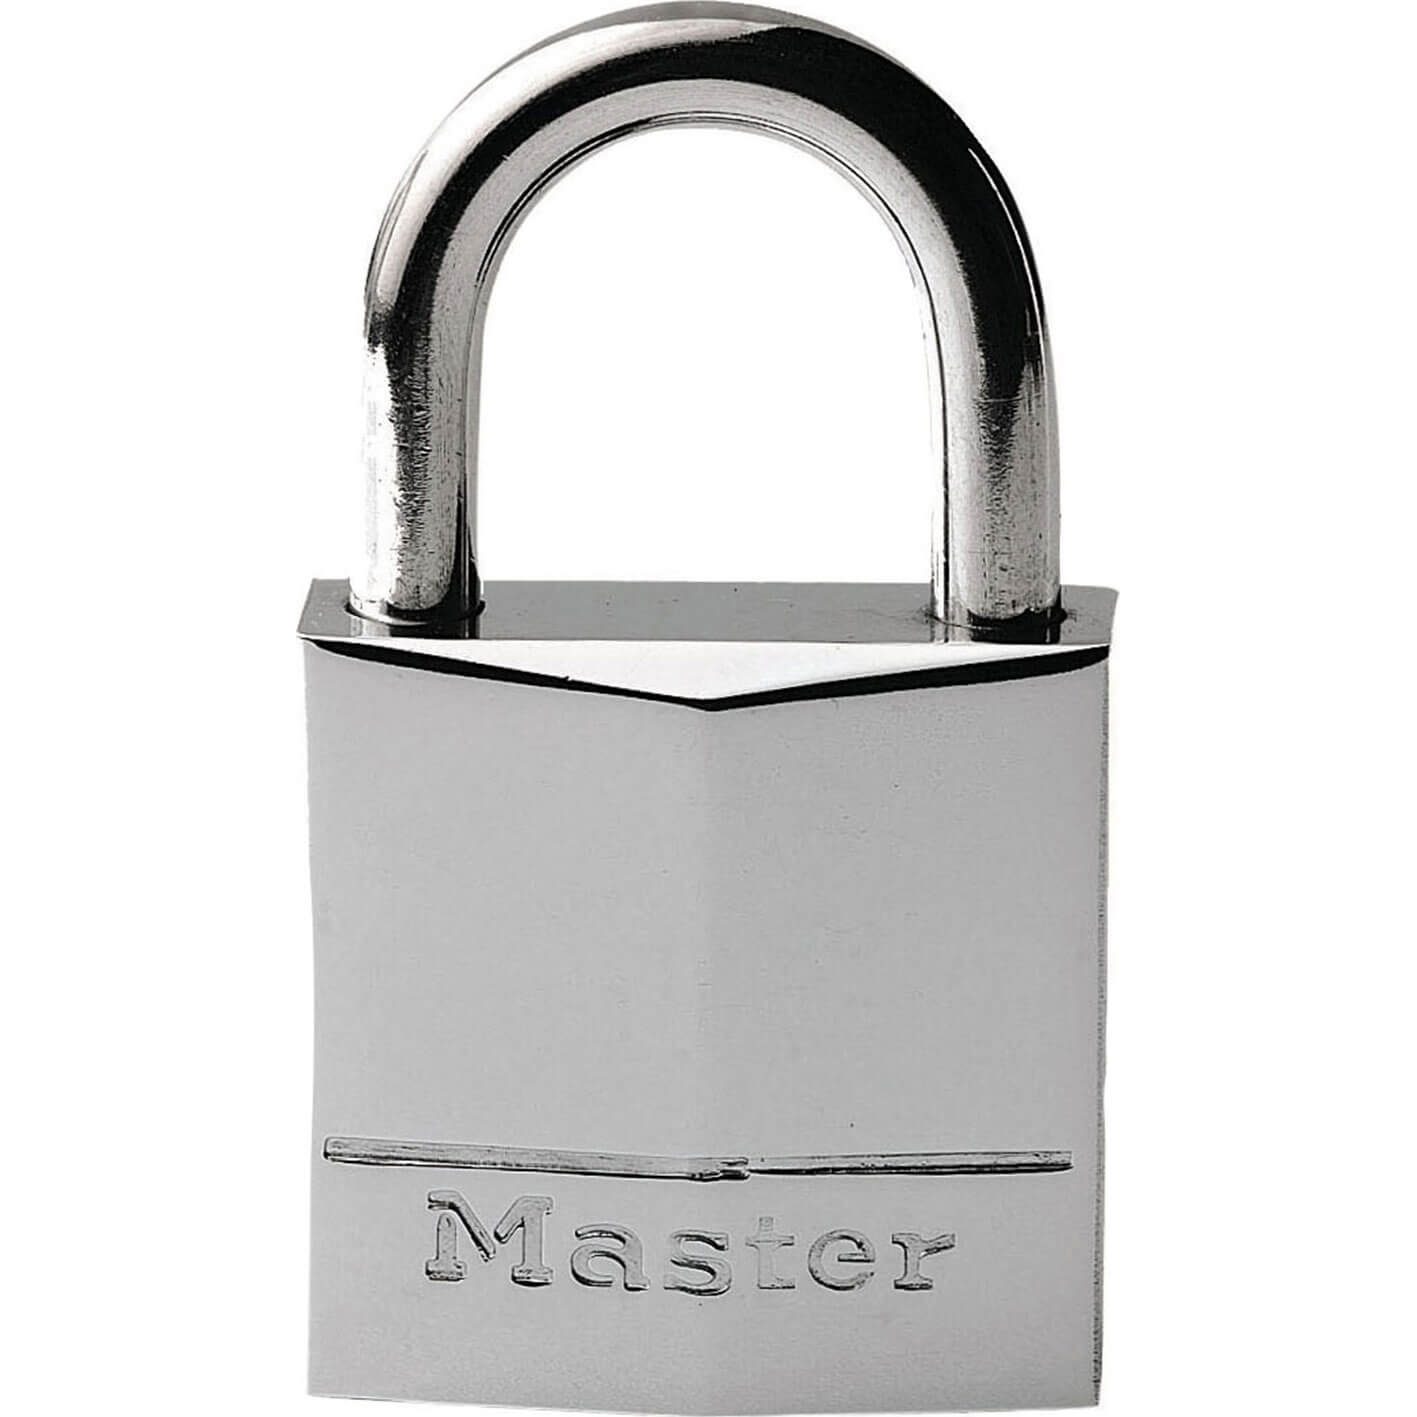 Click to view product details and reviews for Masterlock Marine Padlock 30mm Standard.